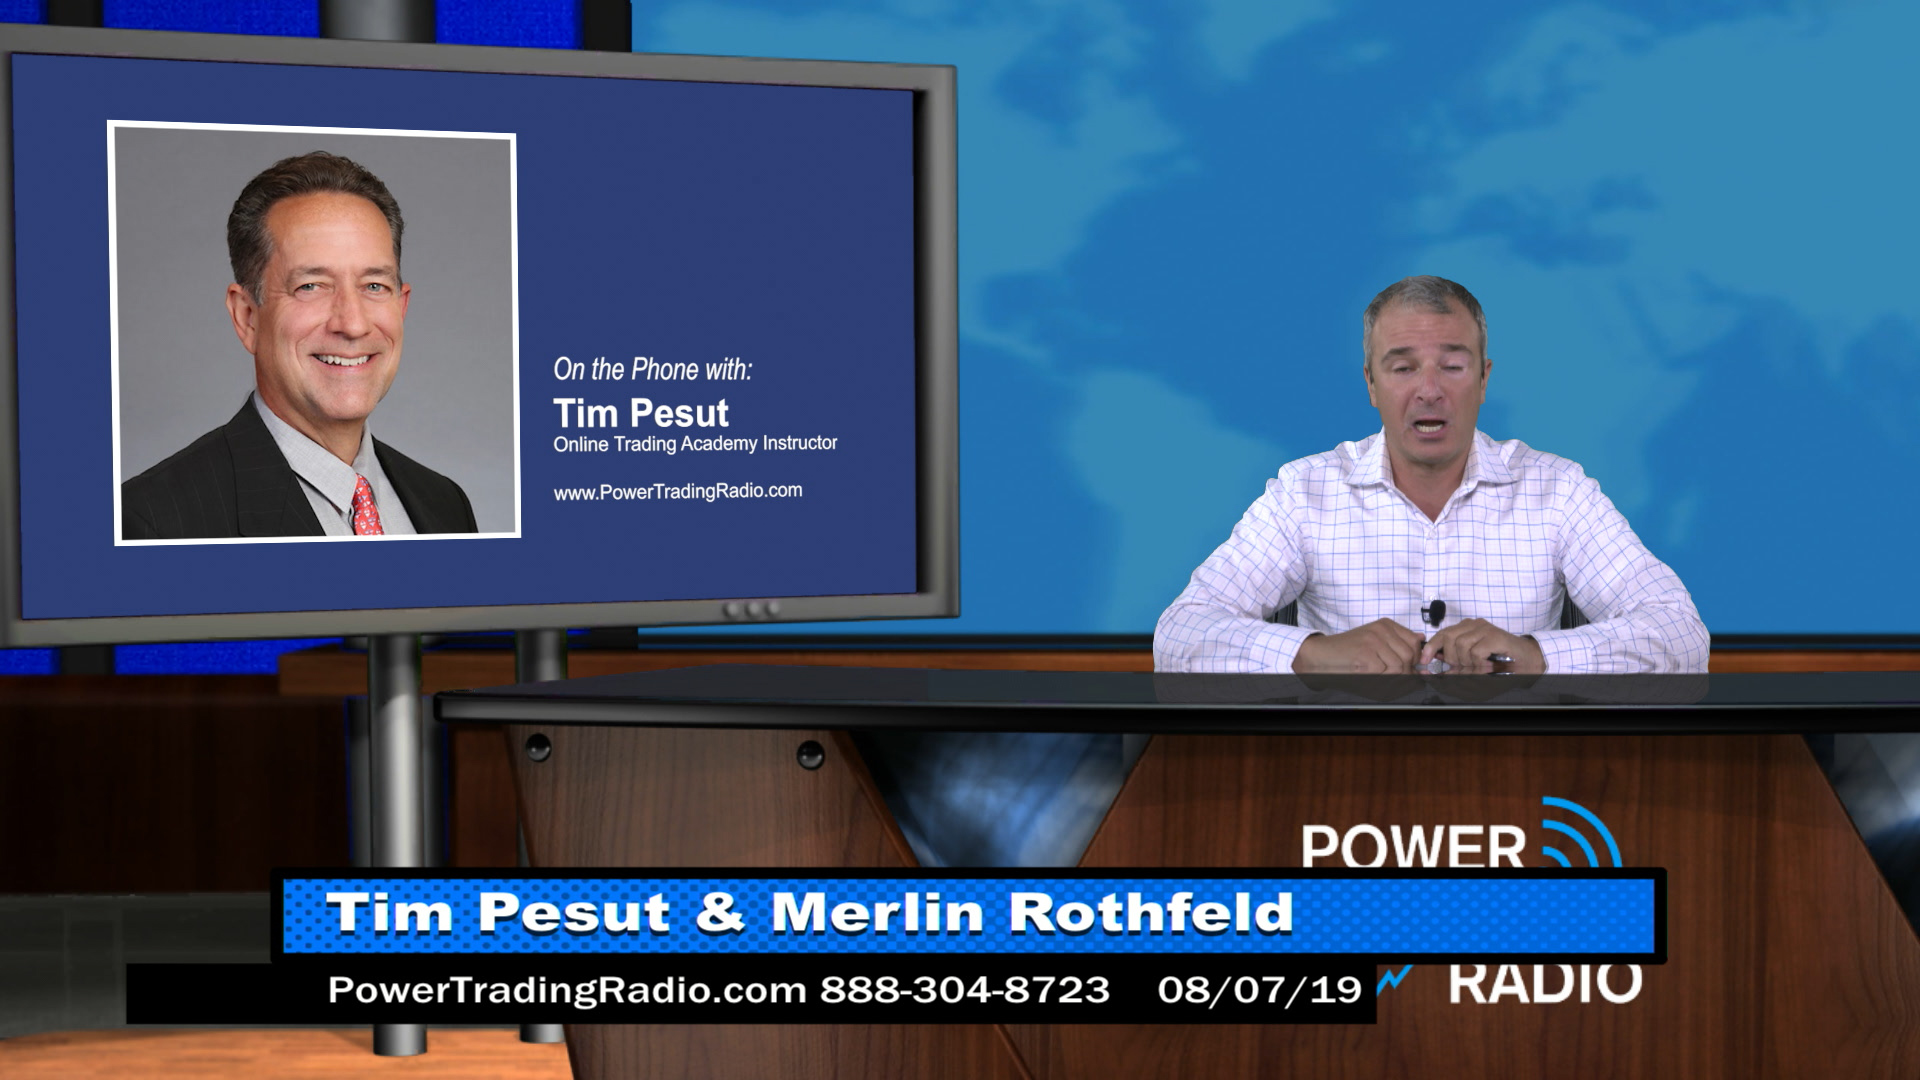 Power Trading Radio Daily Day Trading And Investing Podcasts - 